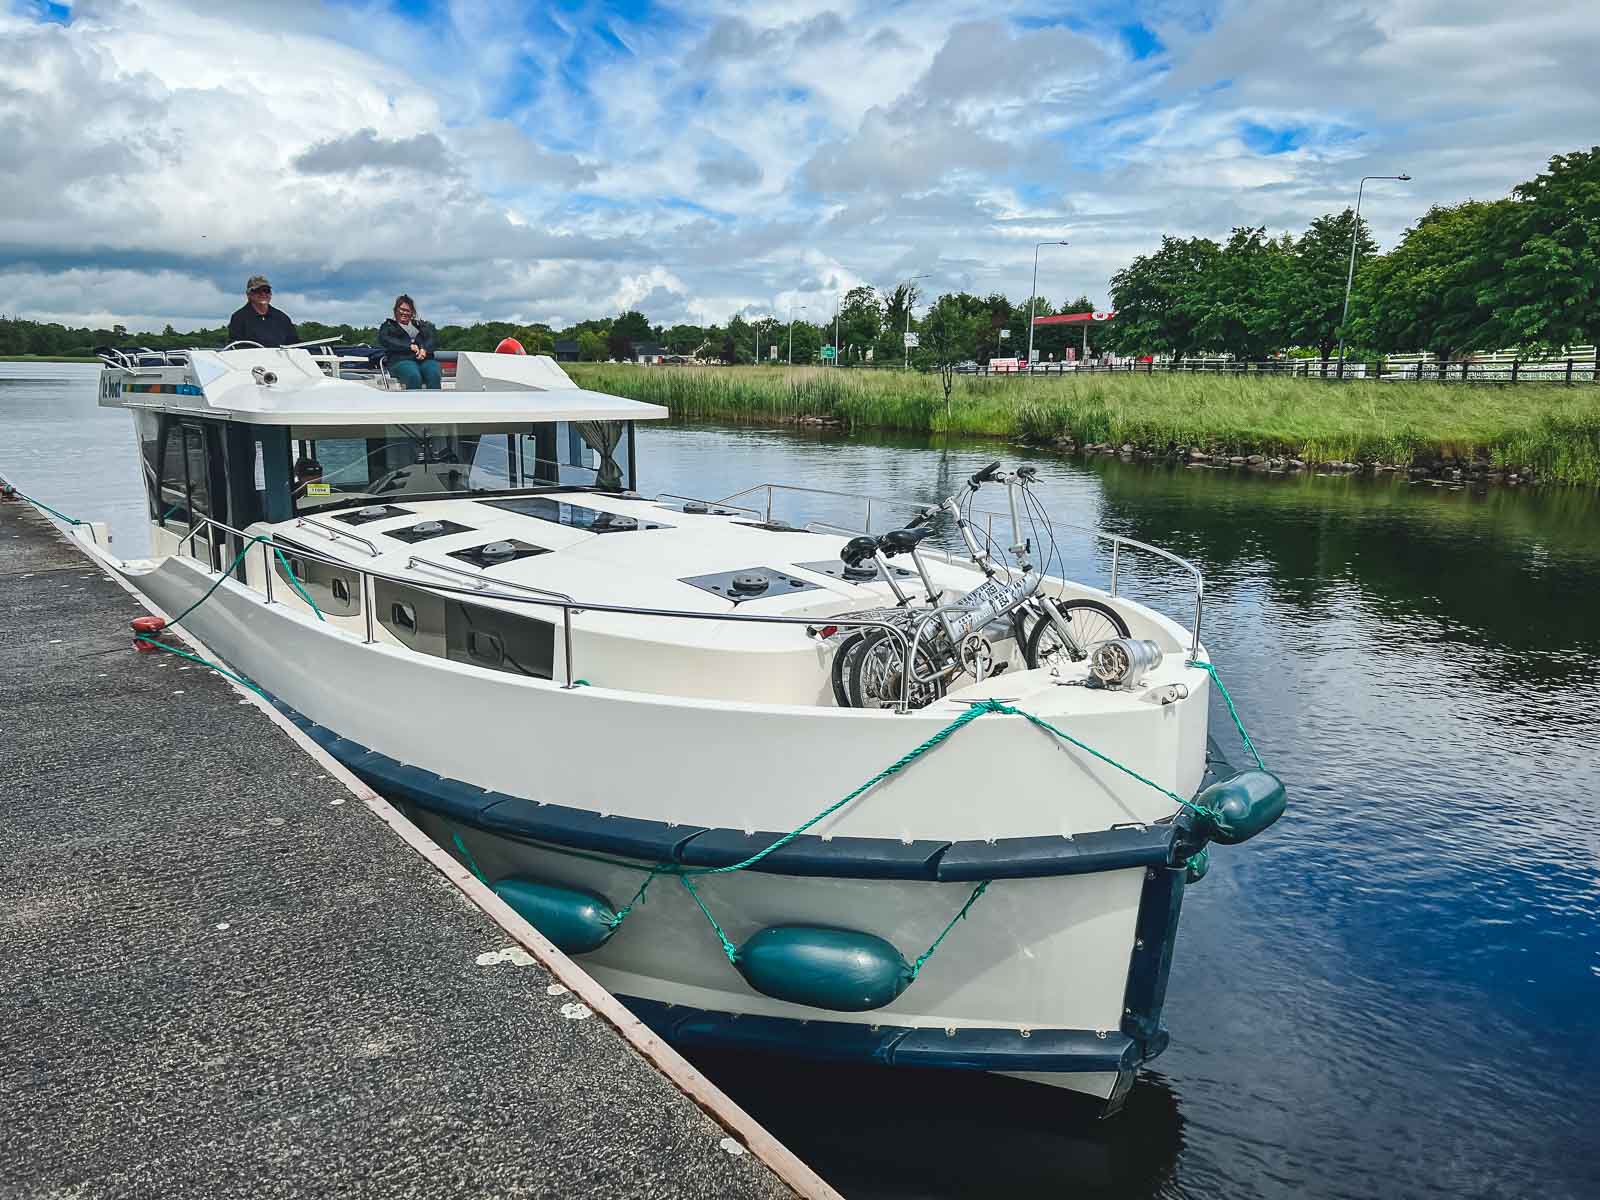 Cruise on the Shannon River Le Boat